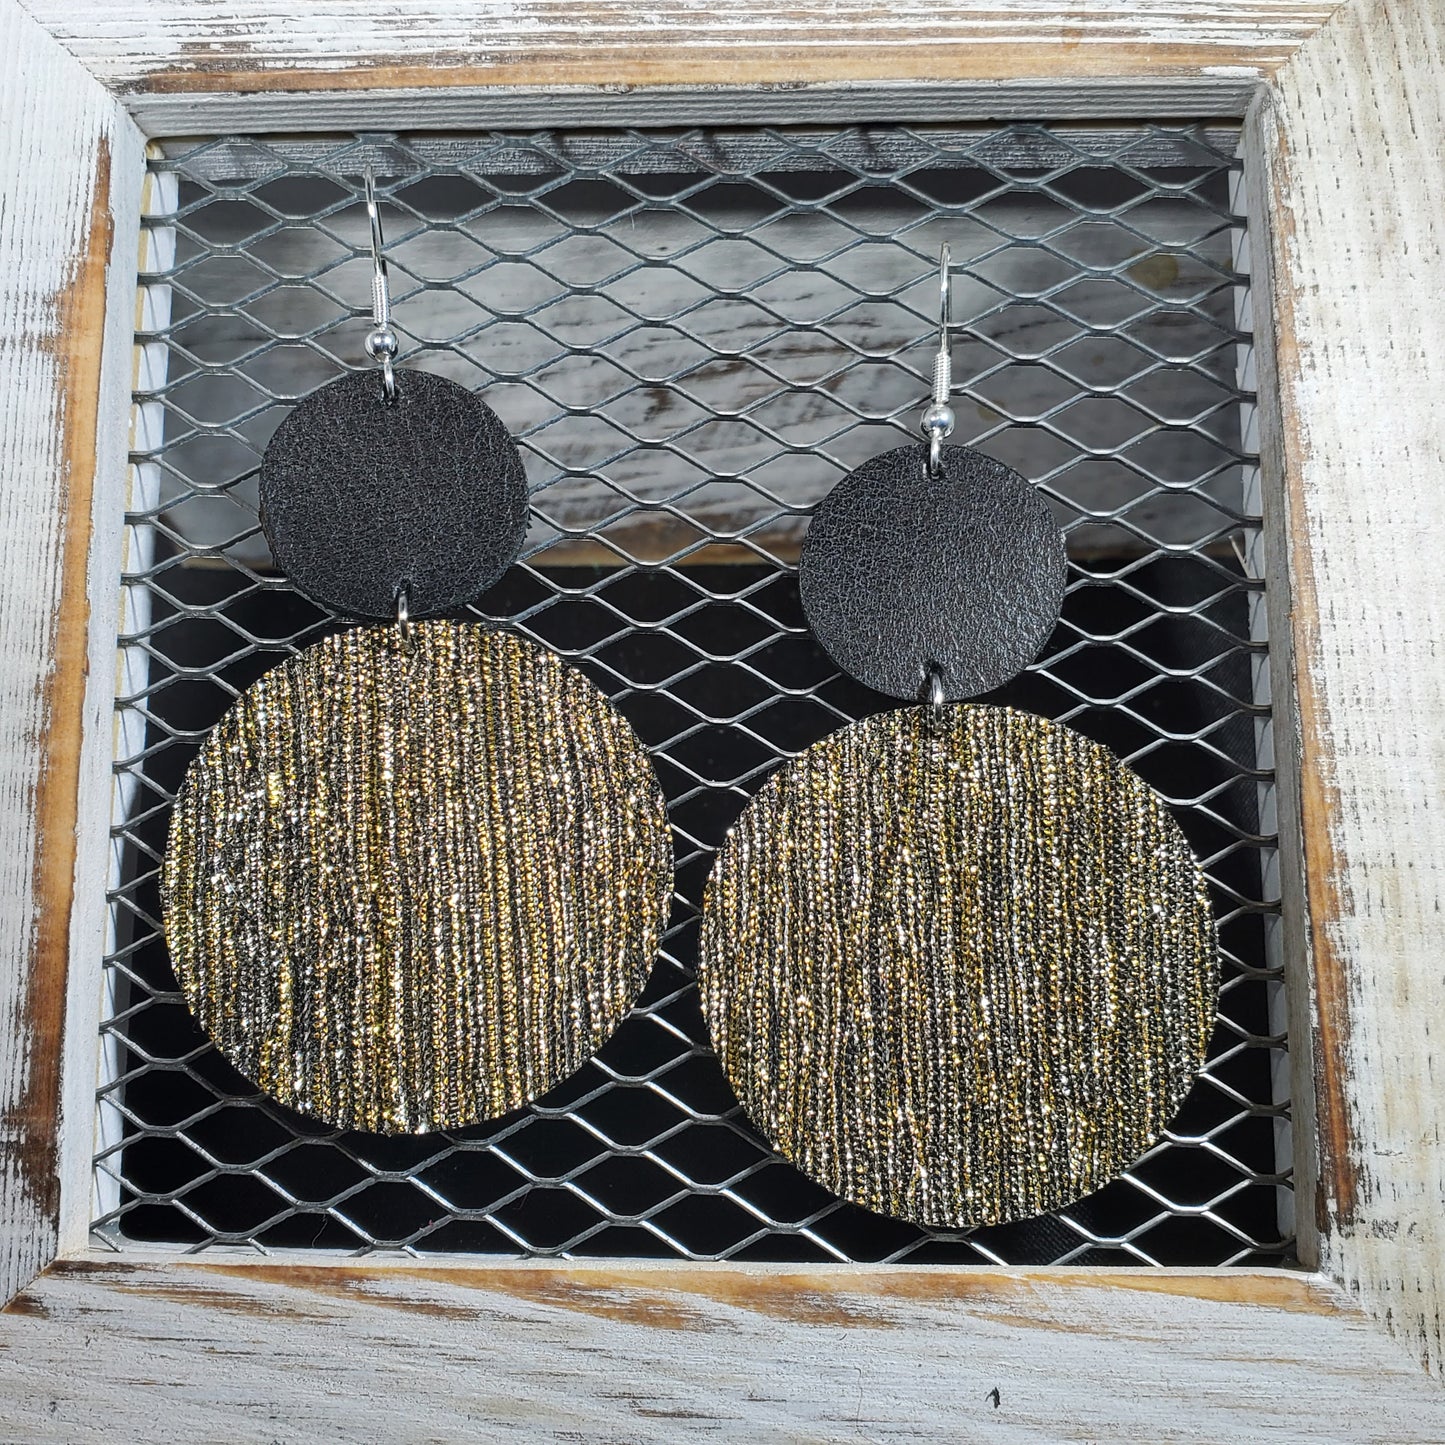 Silver & Gold Leather Earrings